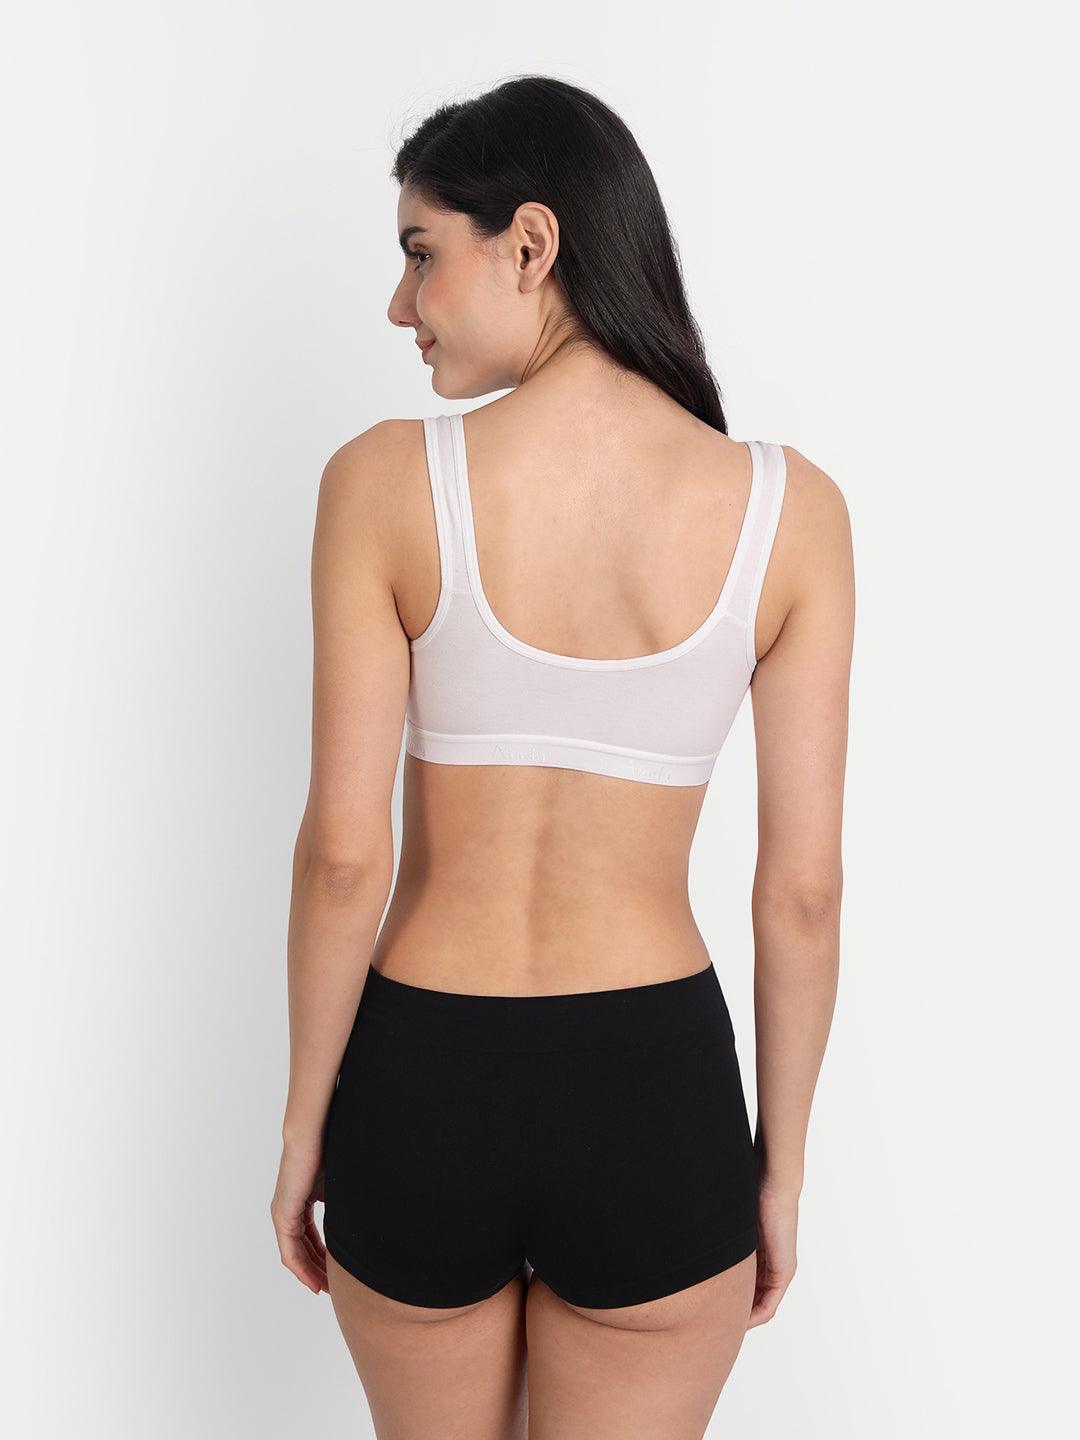 Women's Cotton Non-Padded Non-Wired Seemed Full Coverage Sports Bra